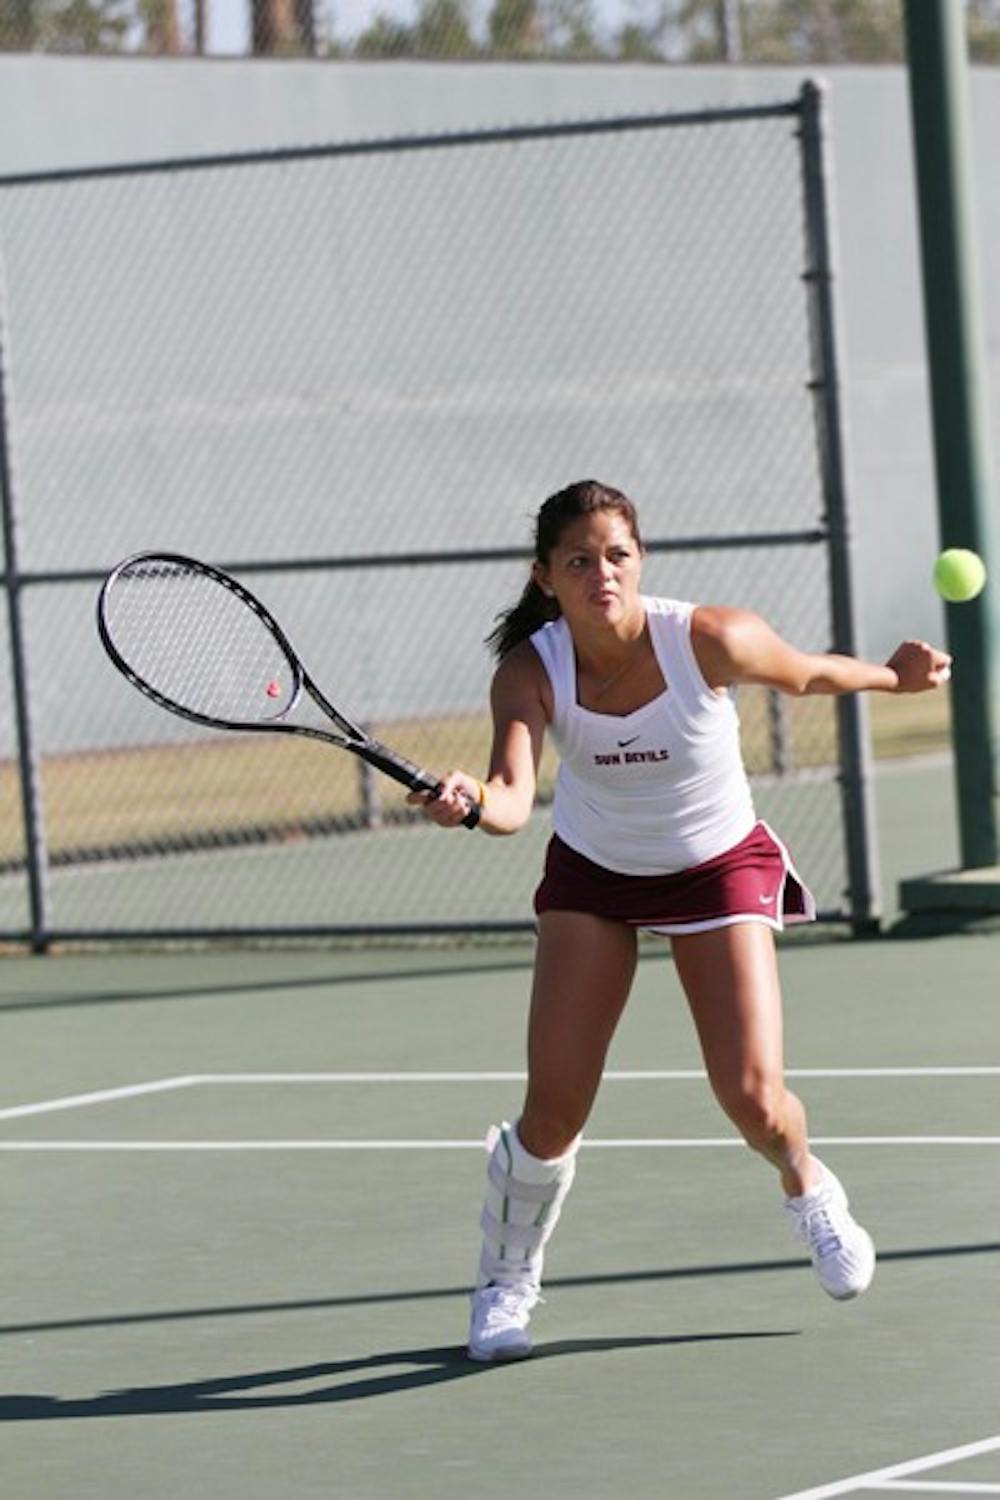 Balancing act: ASU senior Kelcy McKenna shows off her first-place trophy from the ASU Thunderbird Invitational on Nov. 7. Last semester, McKenna student-taught 40 hours a week while continuing to compete with the tennis team. (Photo by Annie Wechter)